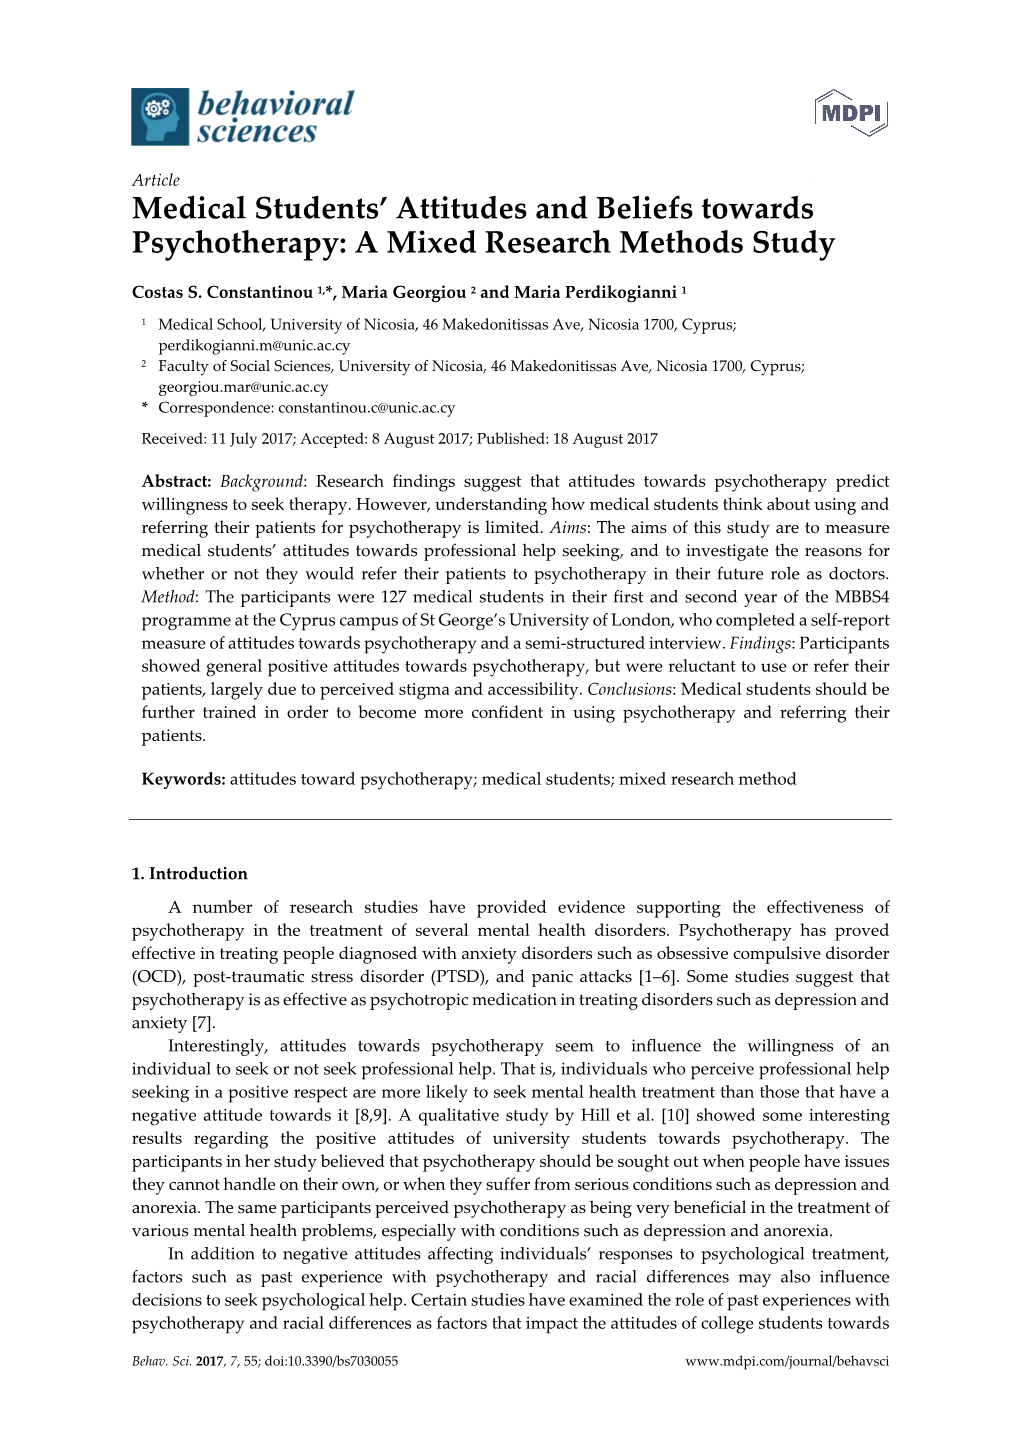 Medical Students' Attitudes and Beliefs Towards Psychotherapy